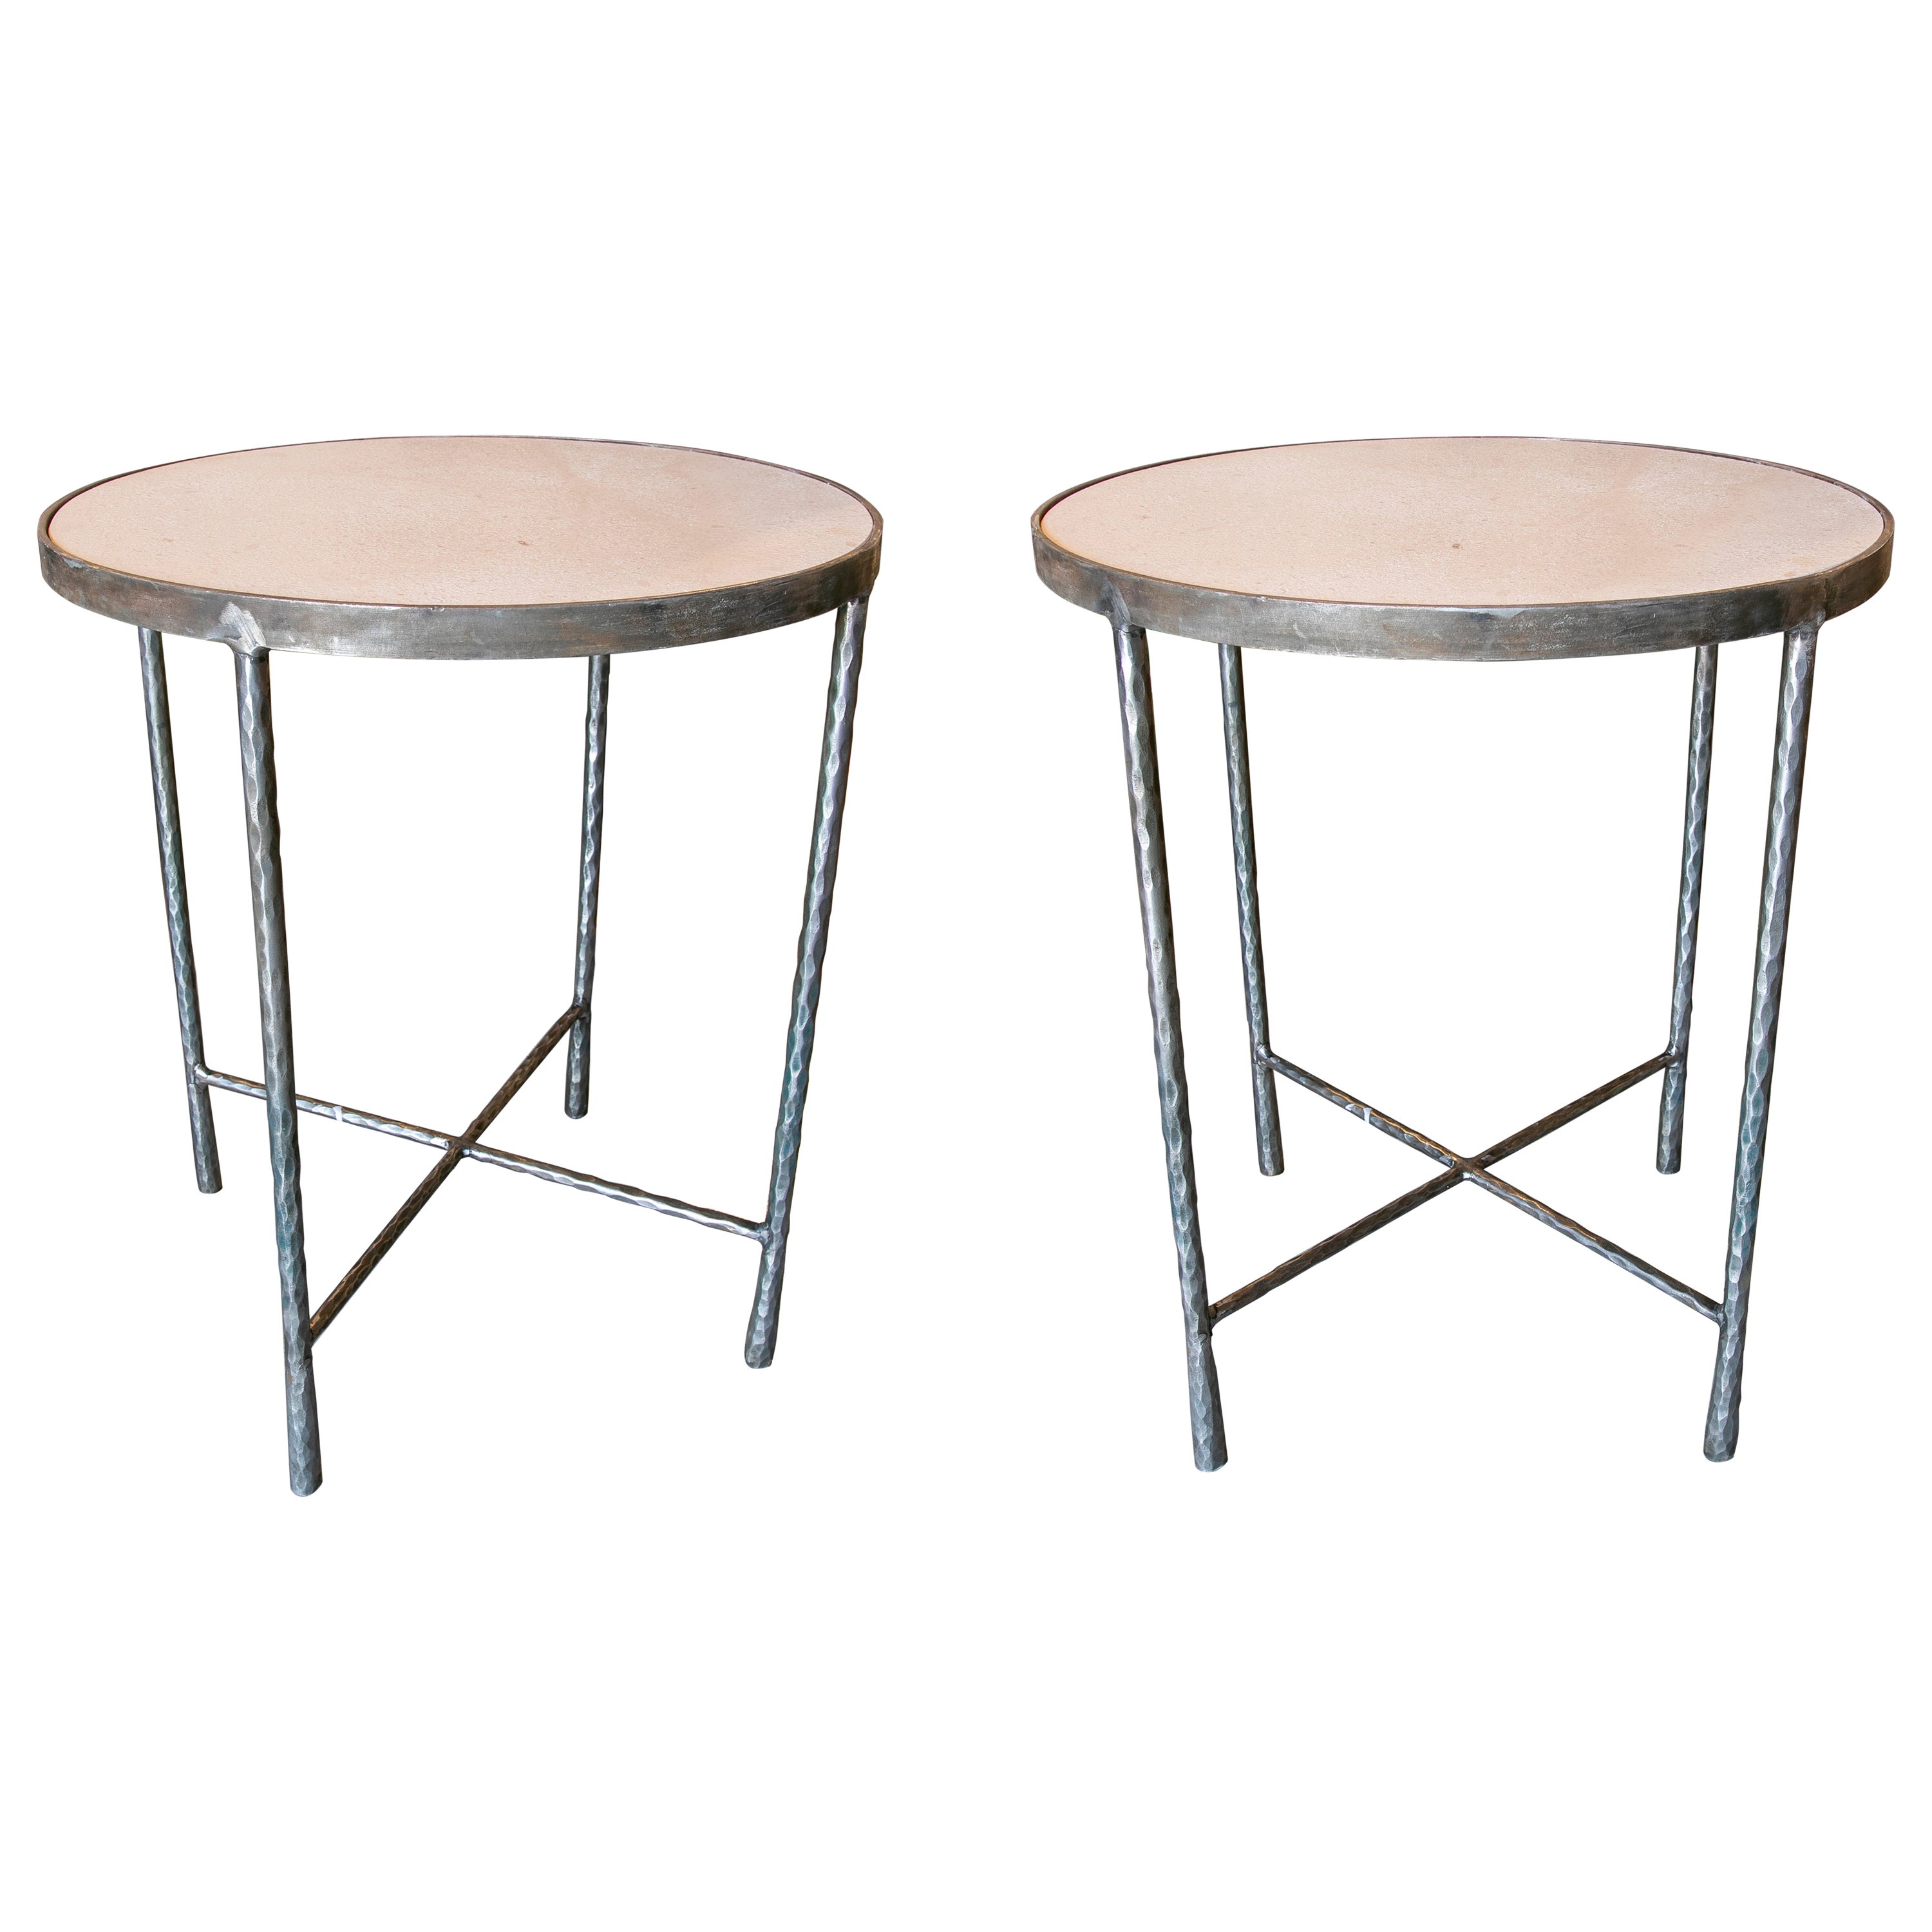 Pair of Round Side Tables in Forged Iron and Limestone Marble Tops For Sale